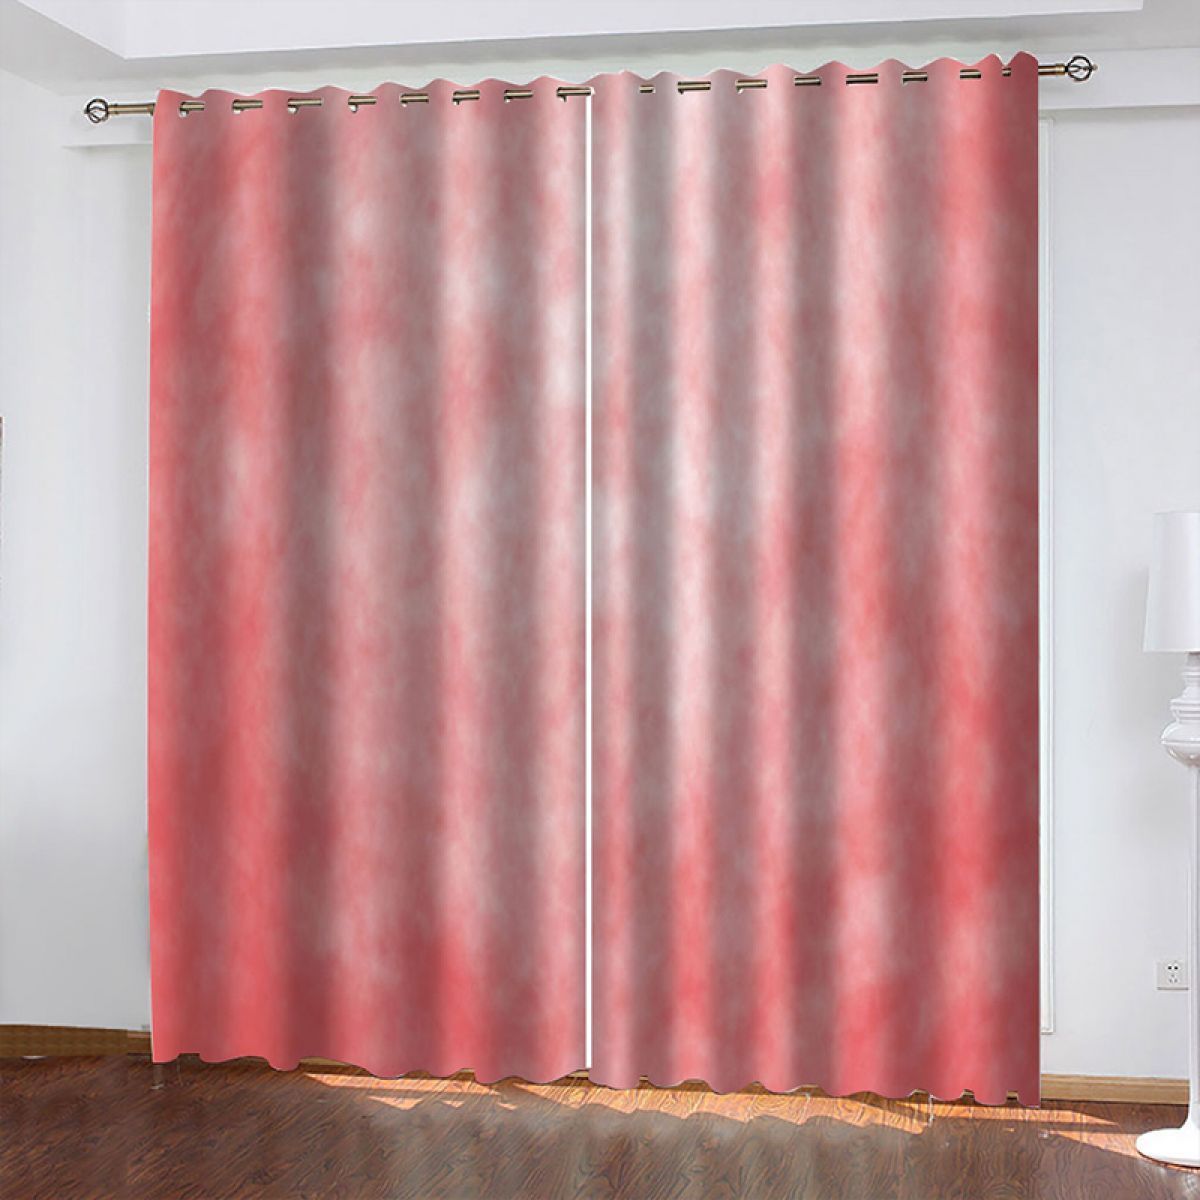 Tie Dye Pattern Pink And White Printed Window Curtain Home Decor